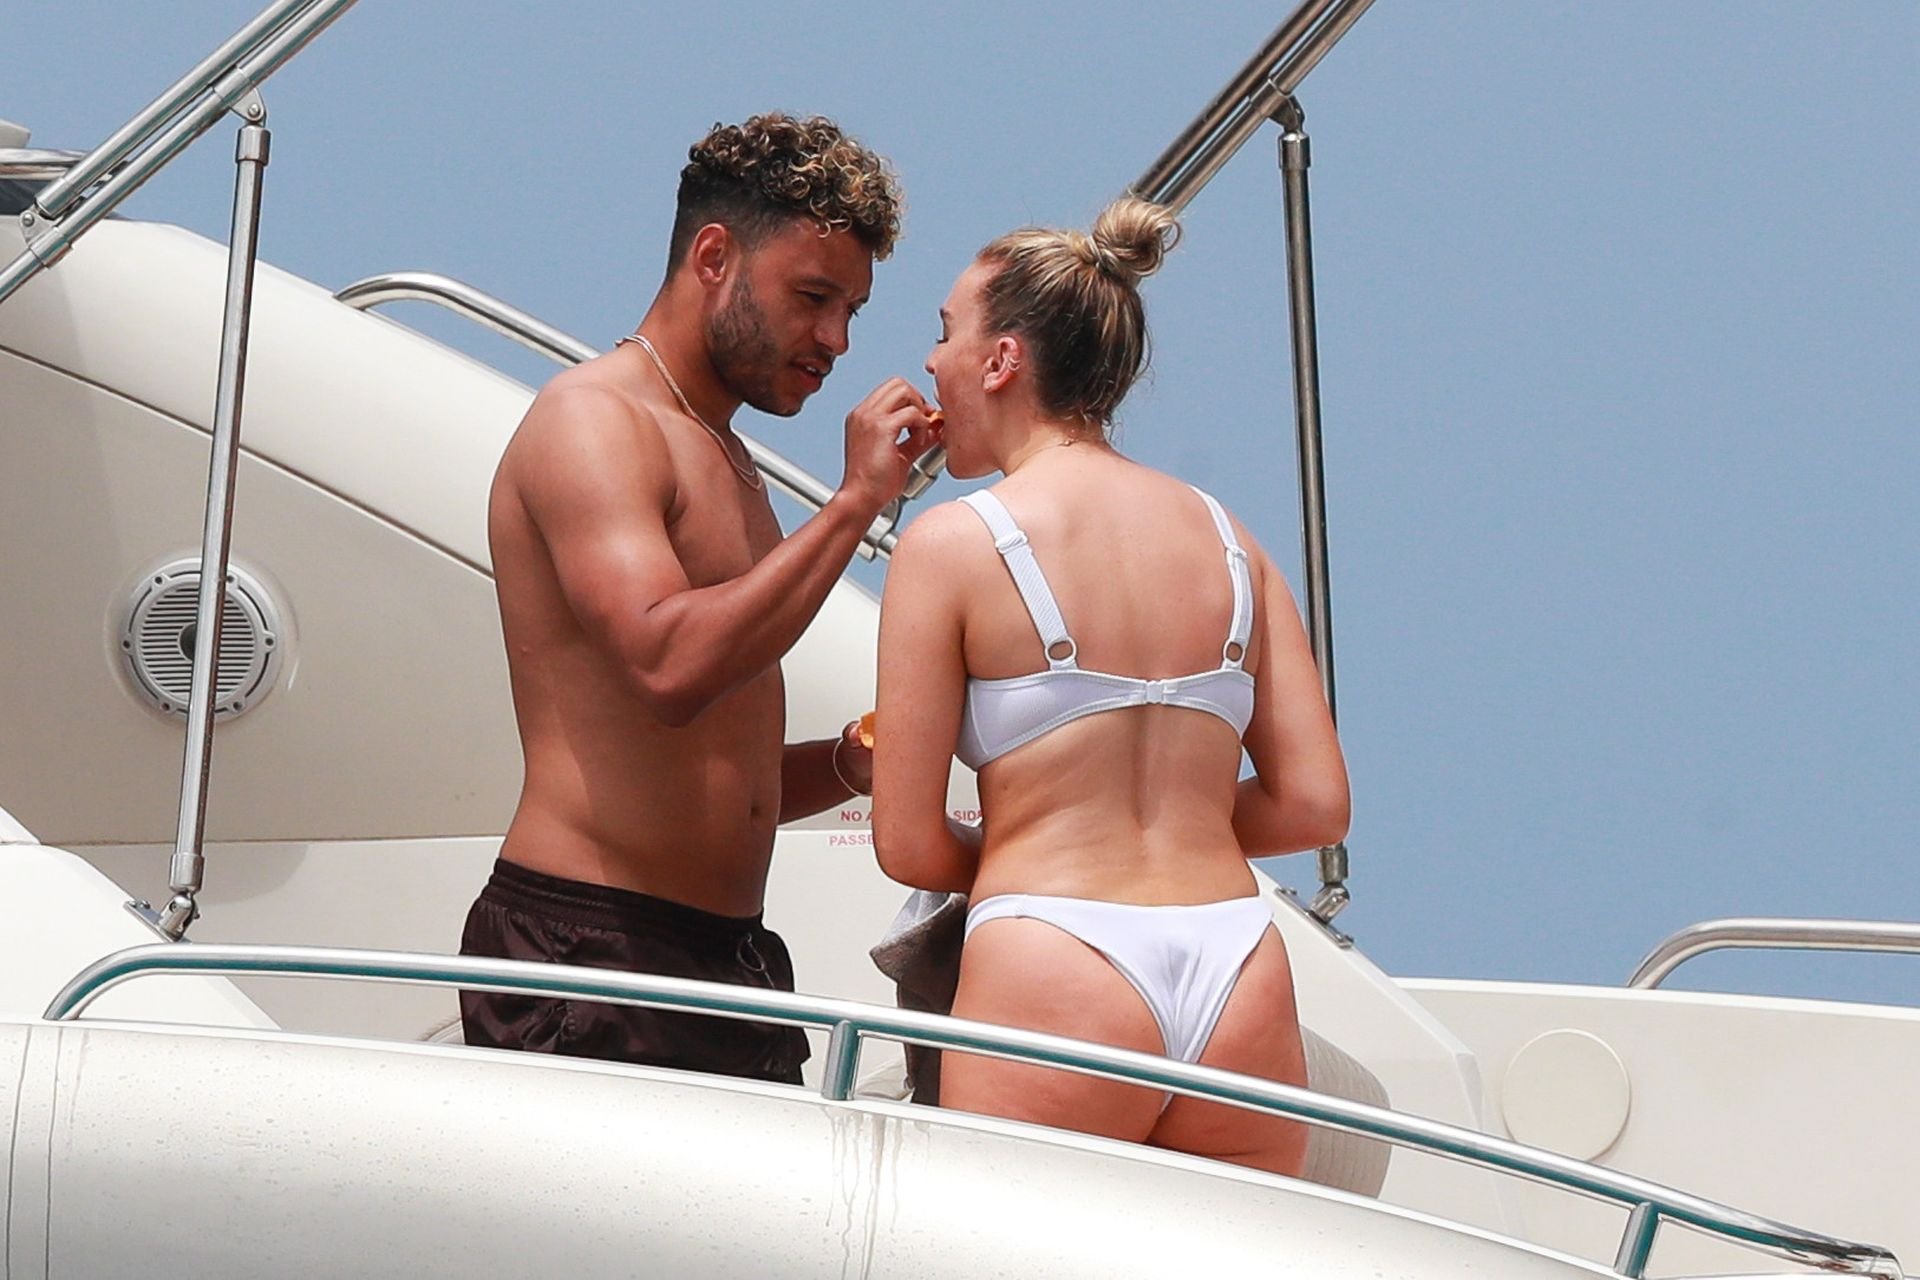 Perrie Edwards Sexy 5 Photos Thefappening